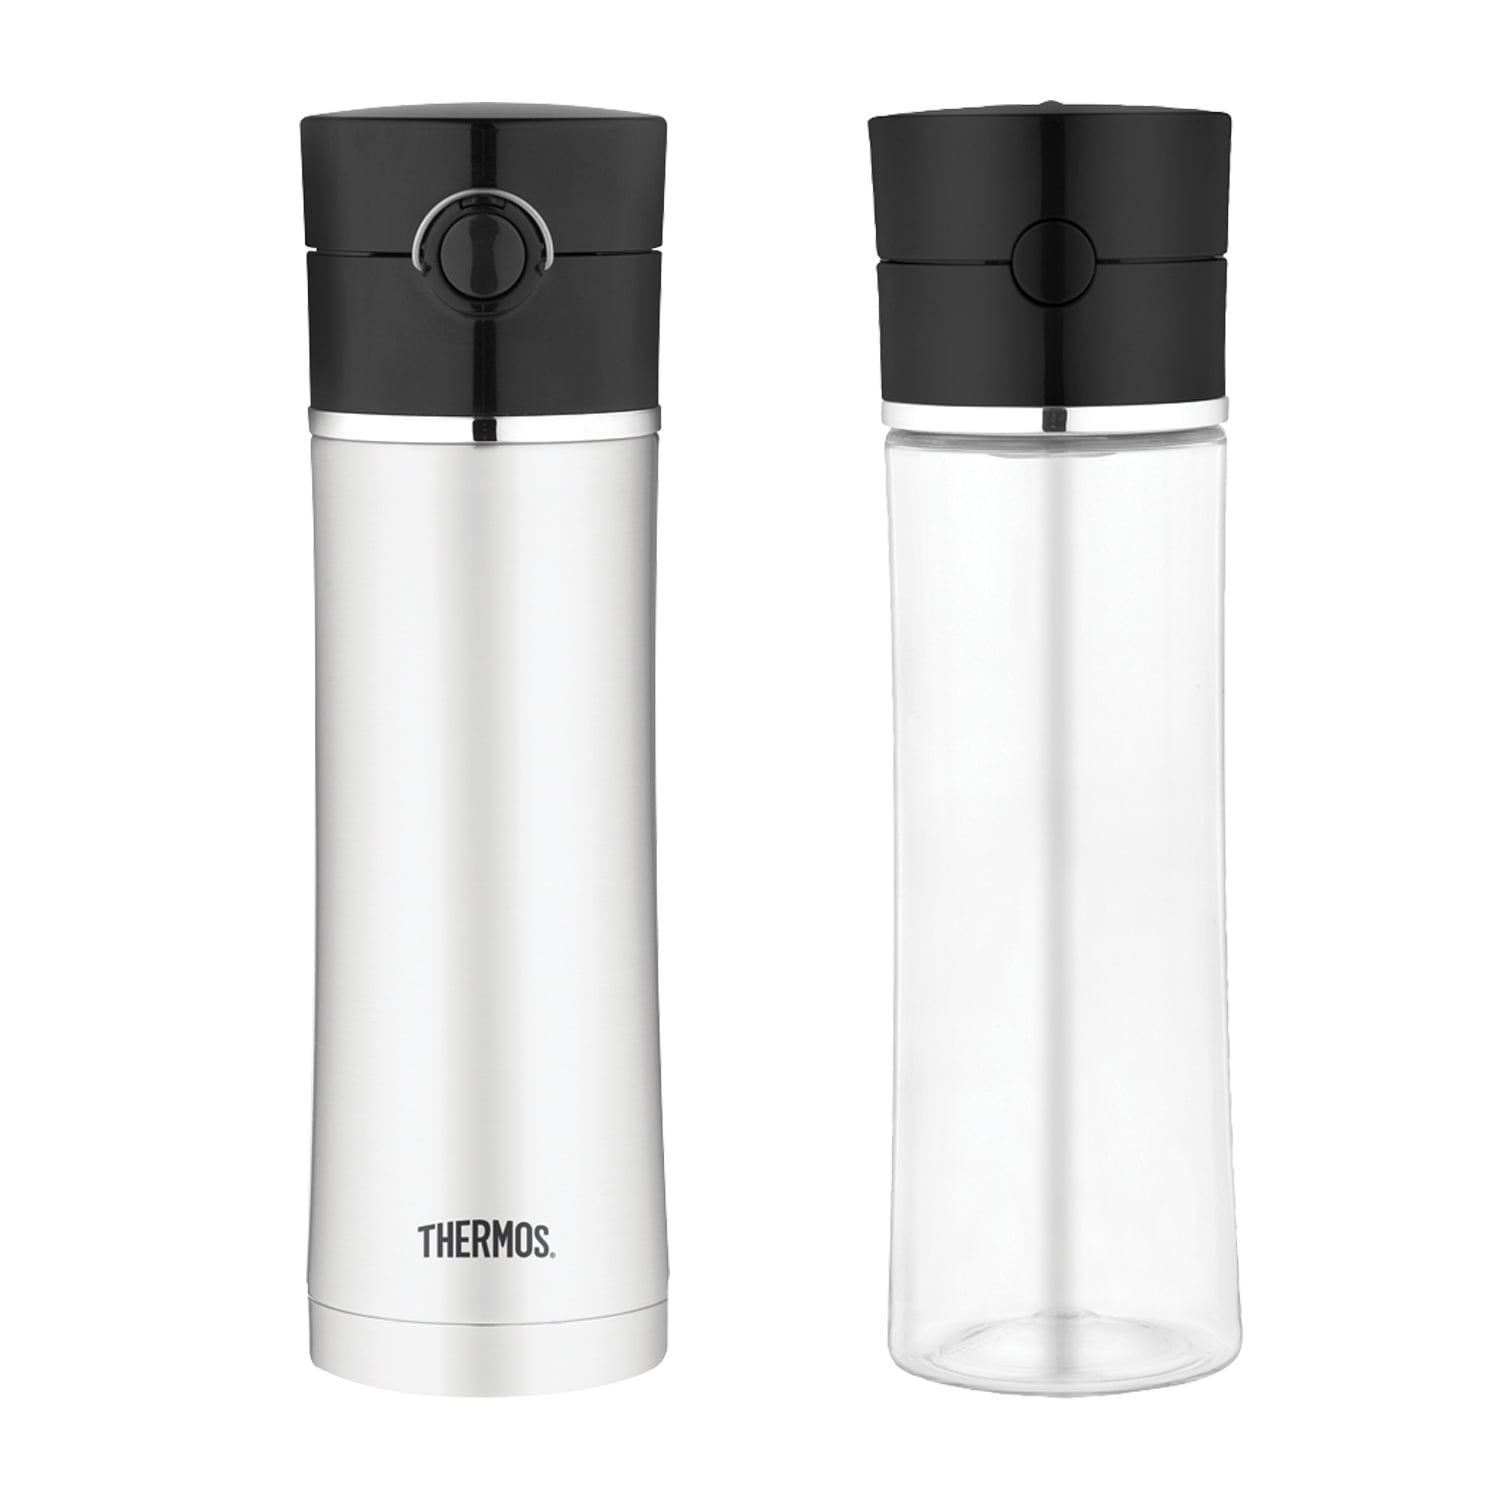 Thermos Sipp 16-Ounce Drink Bottle Black 